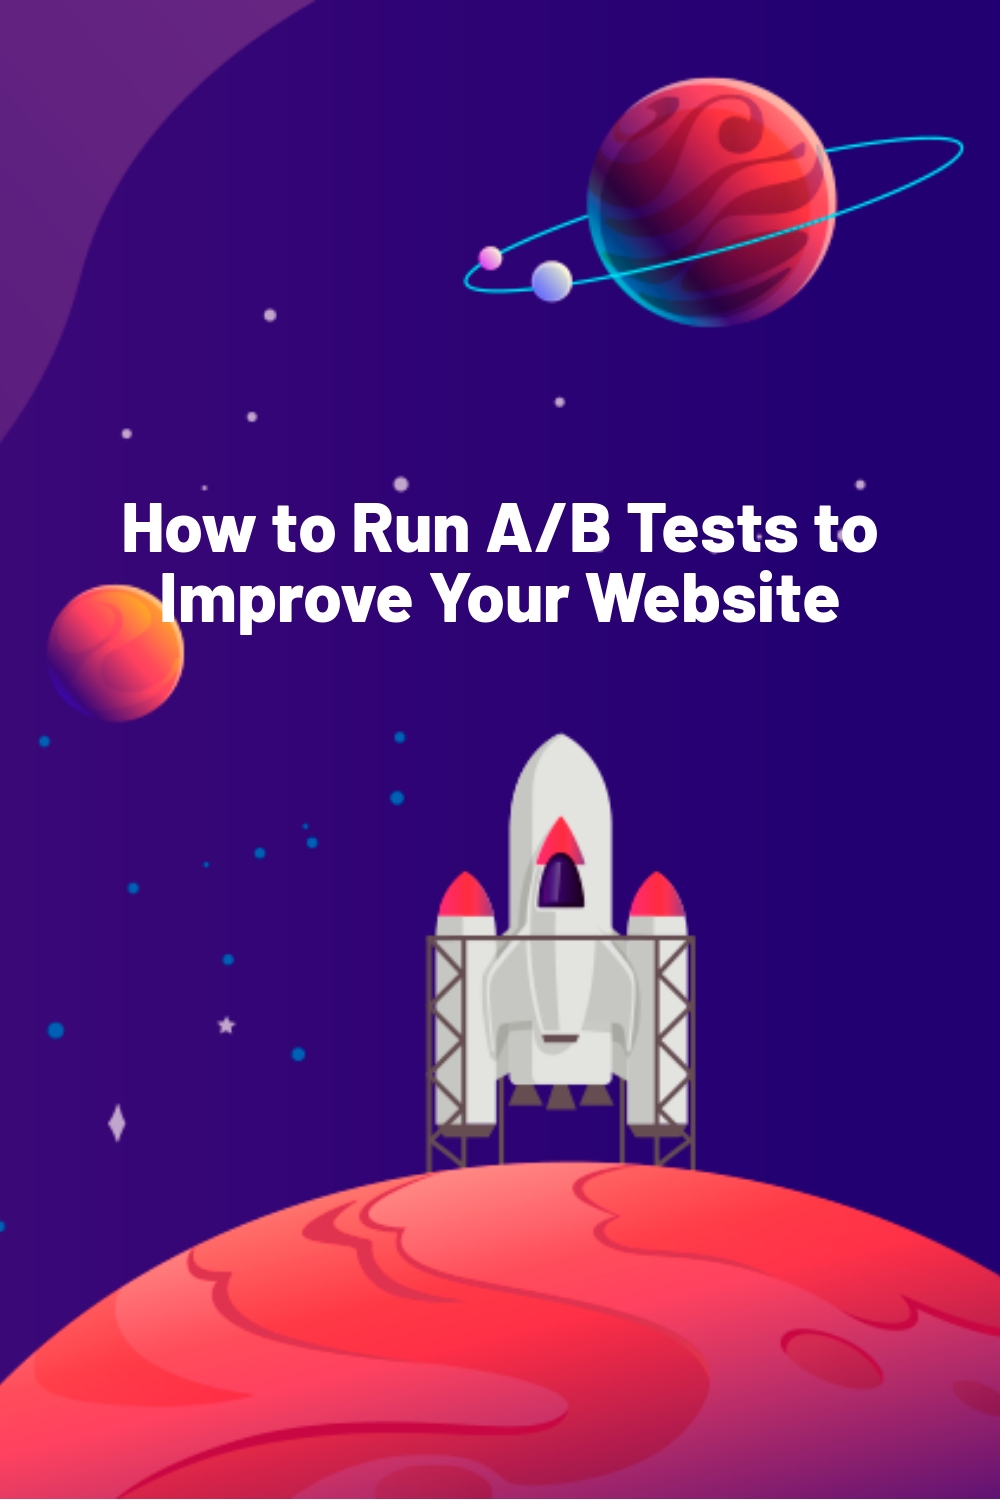 How to Run A/B Tests to Improve Your Website